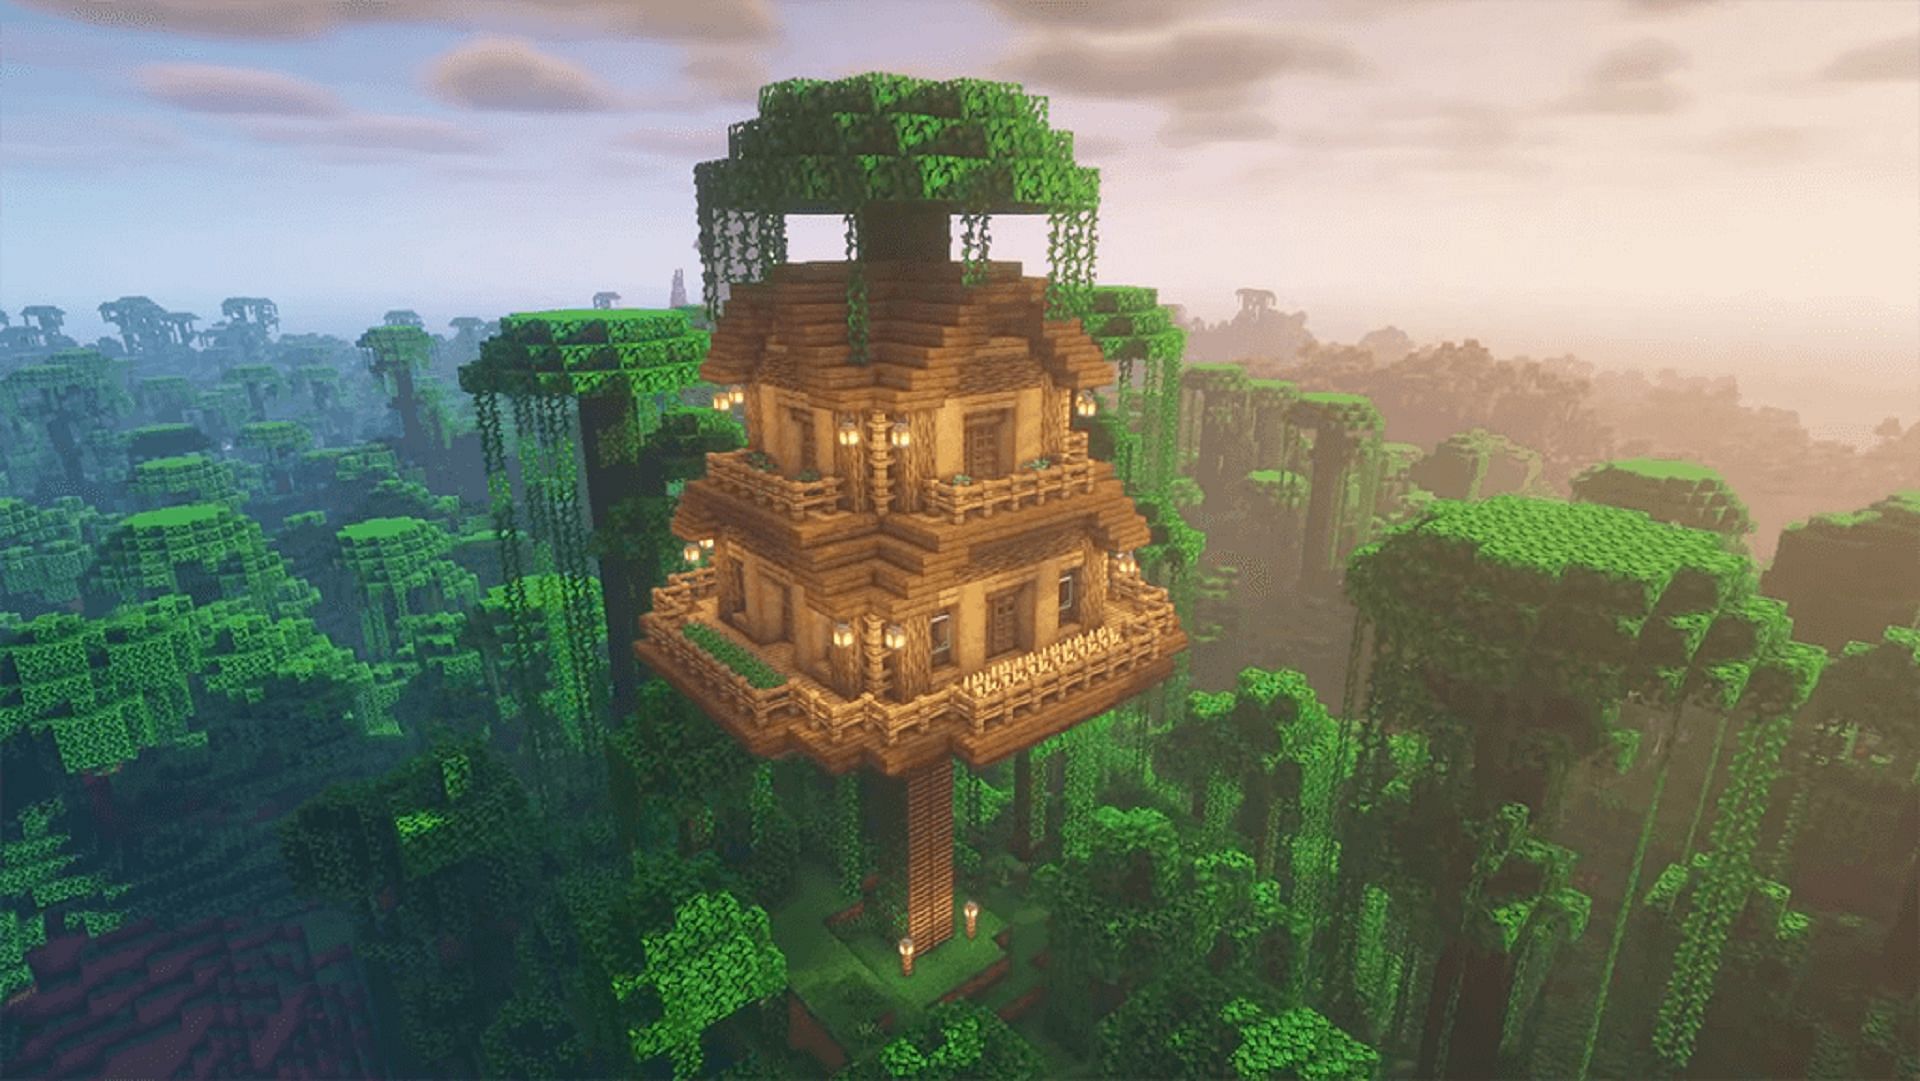 A player-made jungle home in Minecraft (Image via Architectural Style)